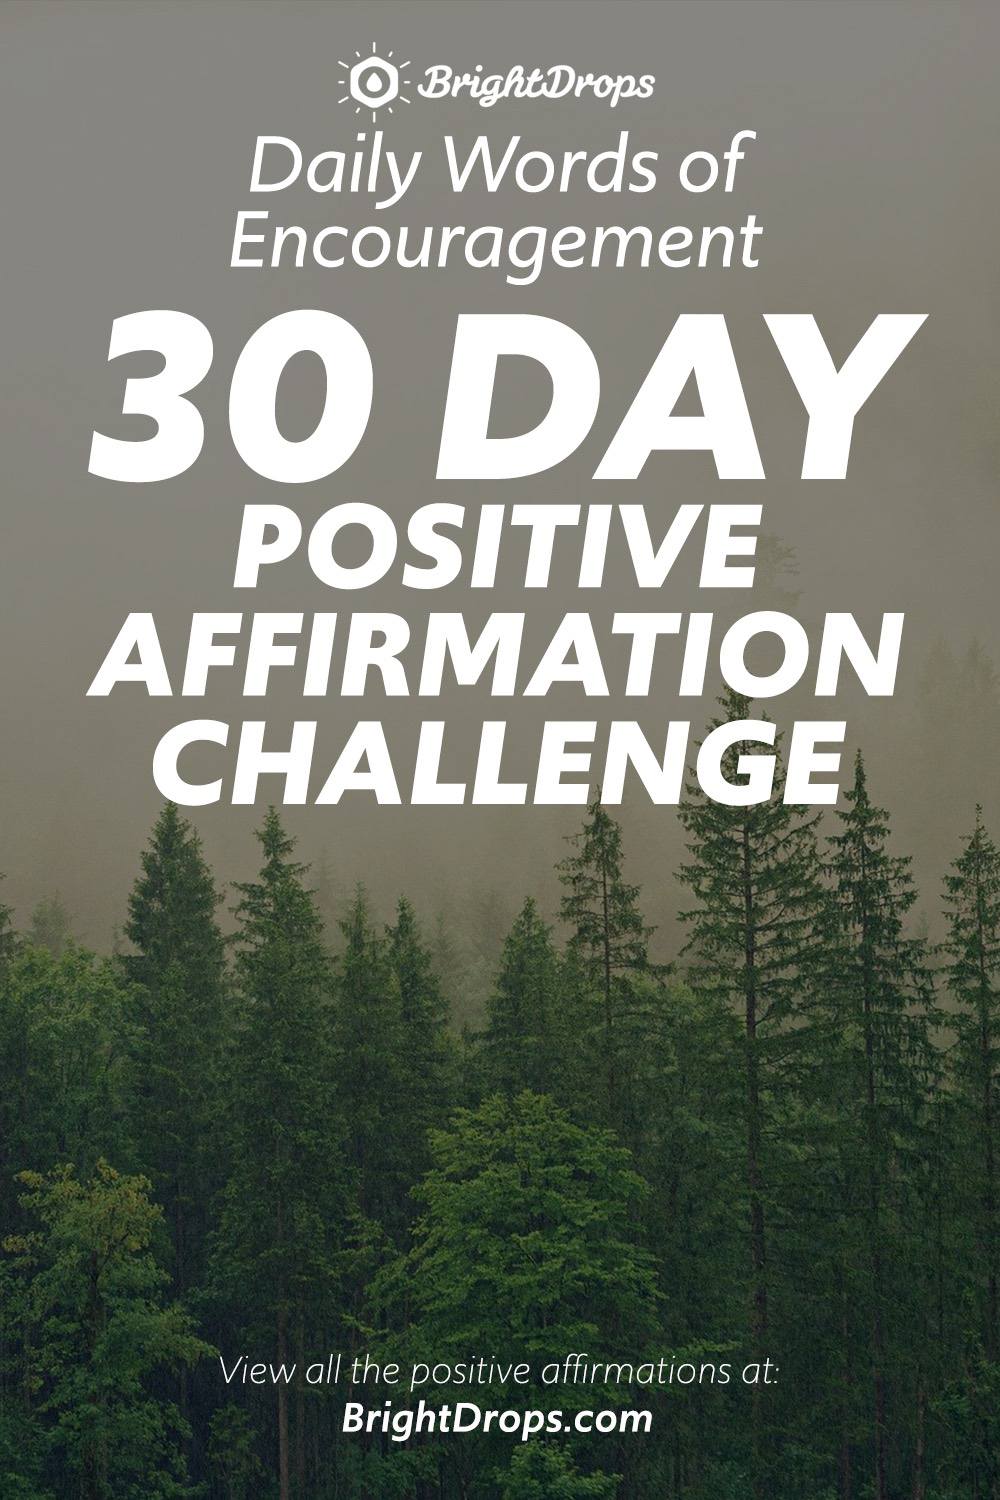 Daily Words of Encouragement 30 Day Positive Affirmation Challenge